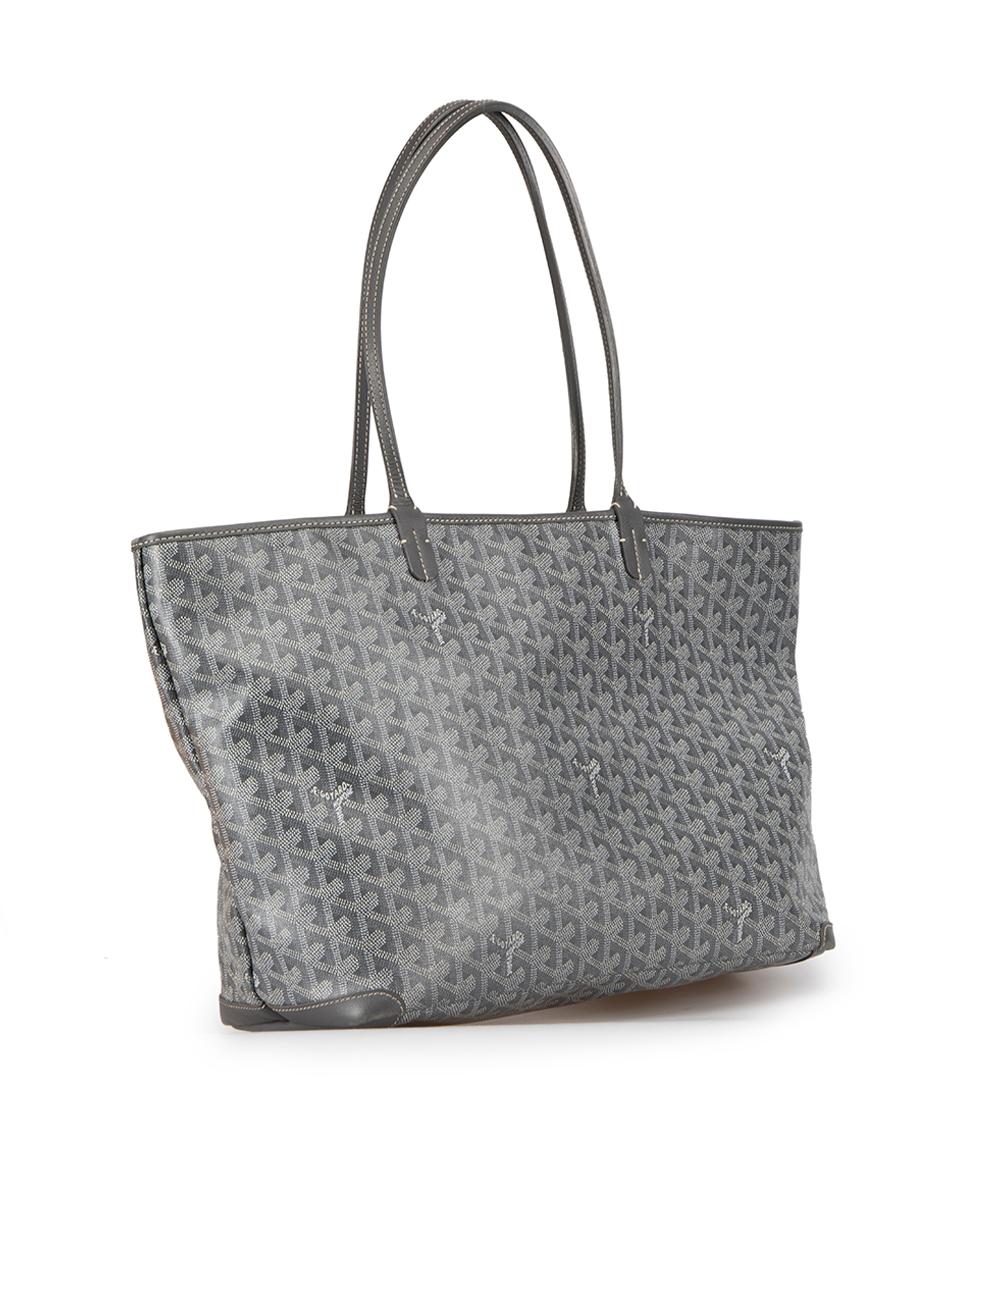 CONDITION is Very good. Minimal wear to bag is evident. Minimal wear to leather exterior with mild abrasion at the base corners, interior shows noticeable signs of use with marking seen throughout on this used Goyard designer resale item. Comes in